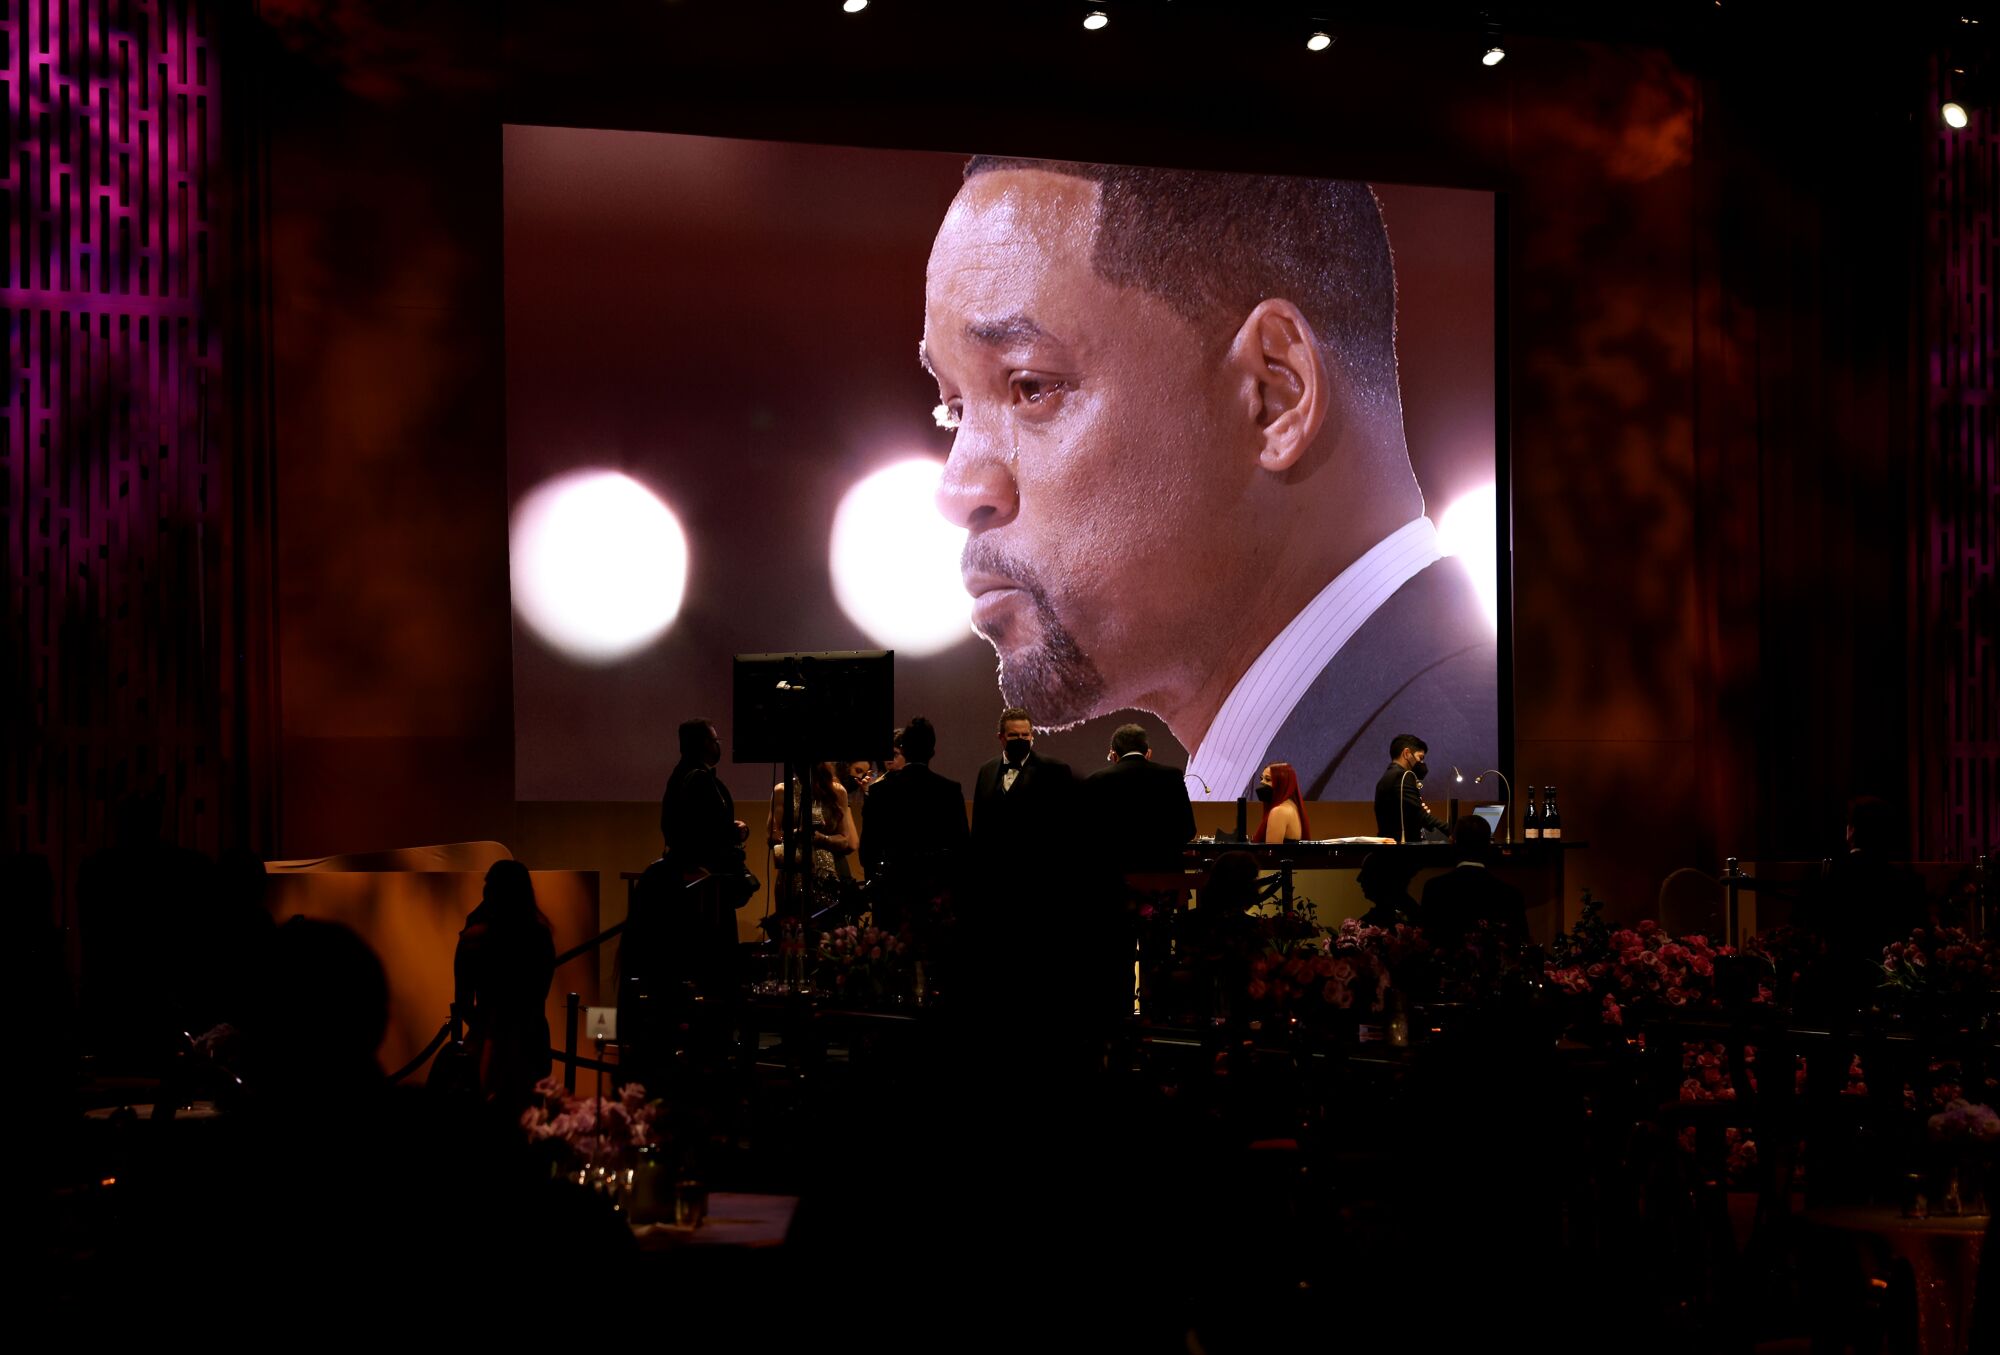 Will Smith on the monitor during the Governors Ball at the 94th Academy Awards at the Dolby Theatre.